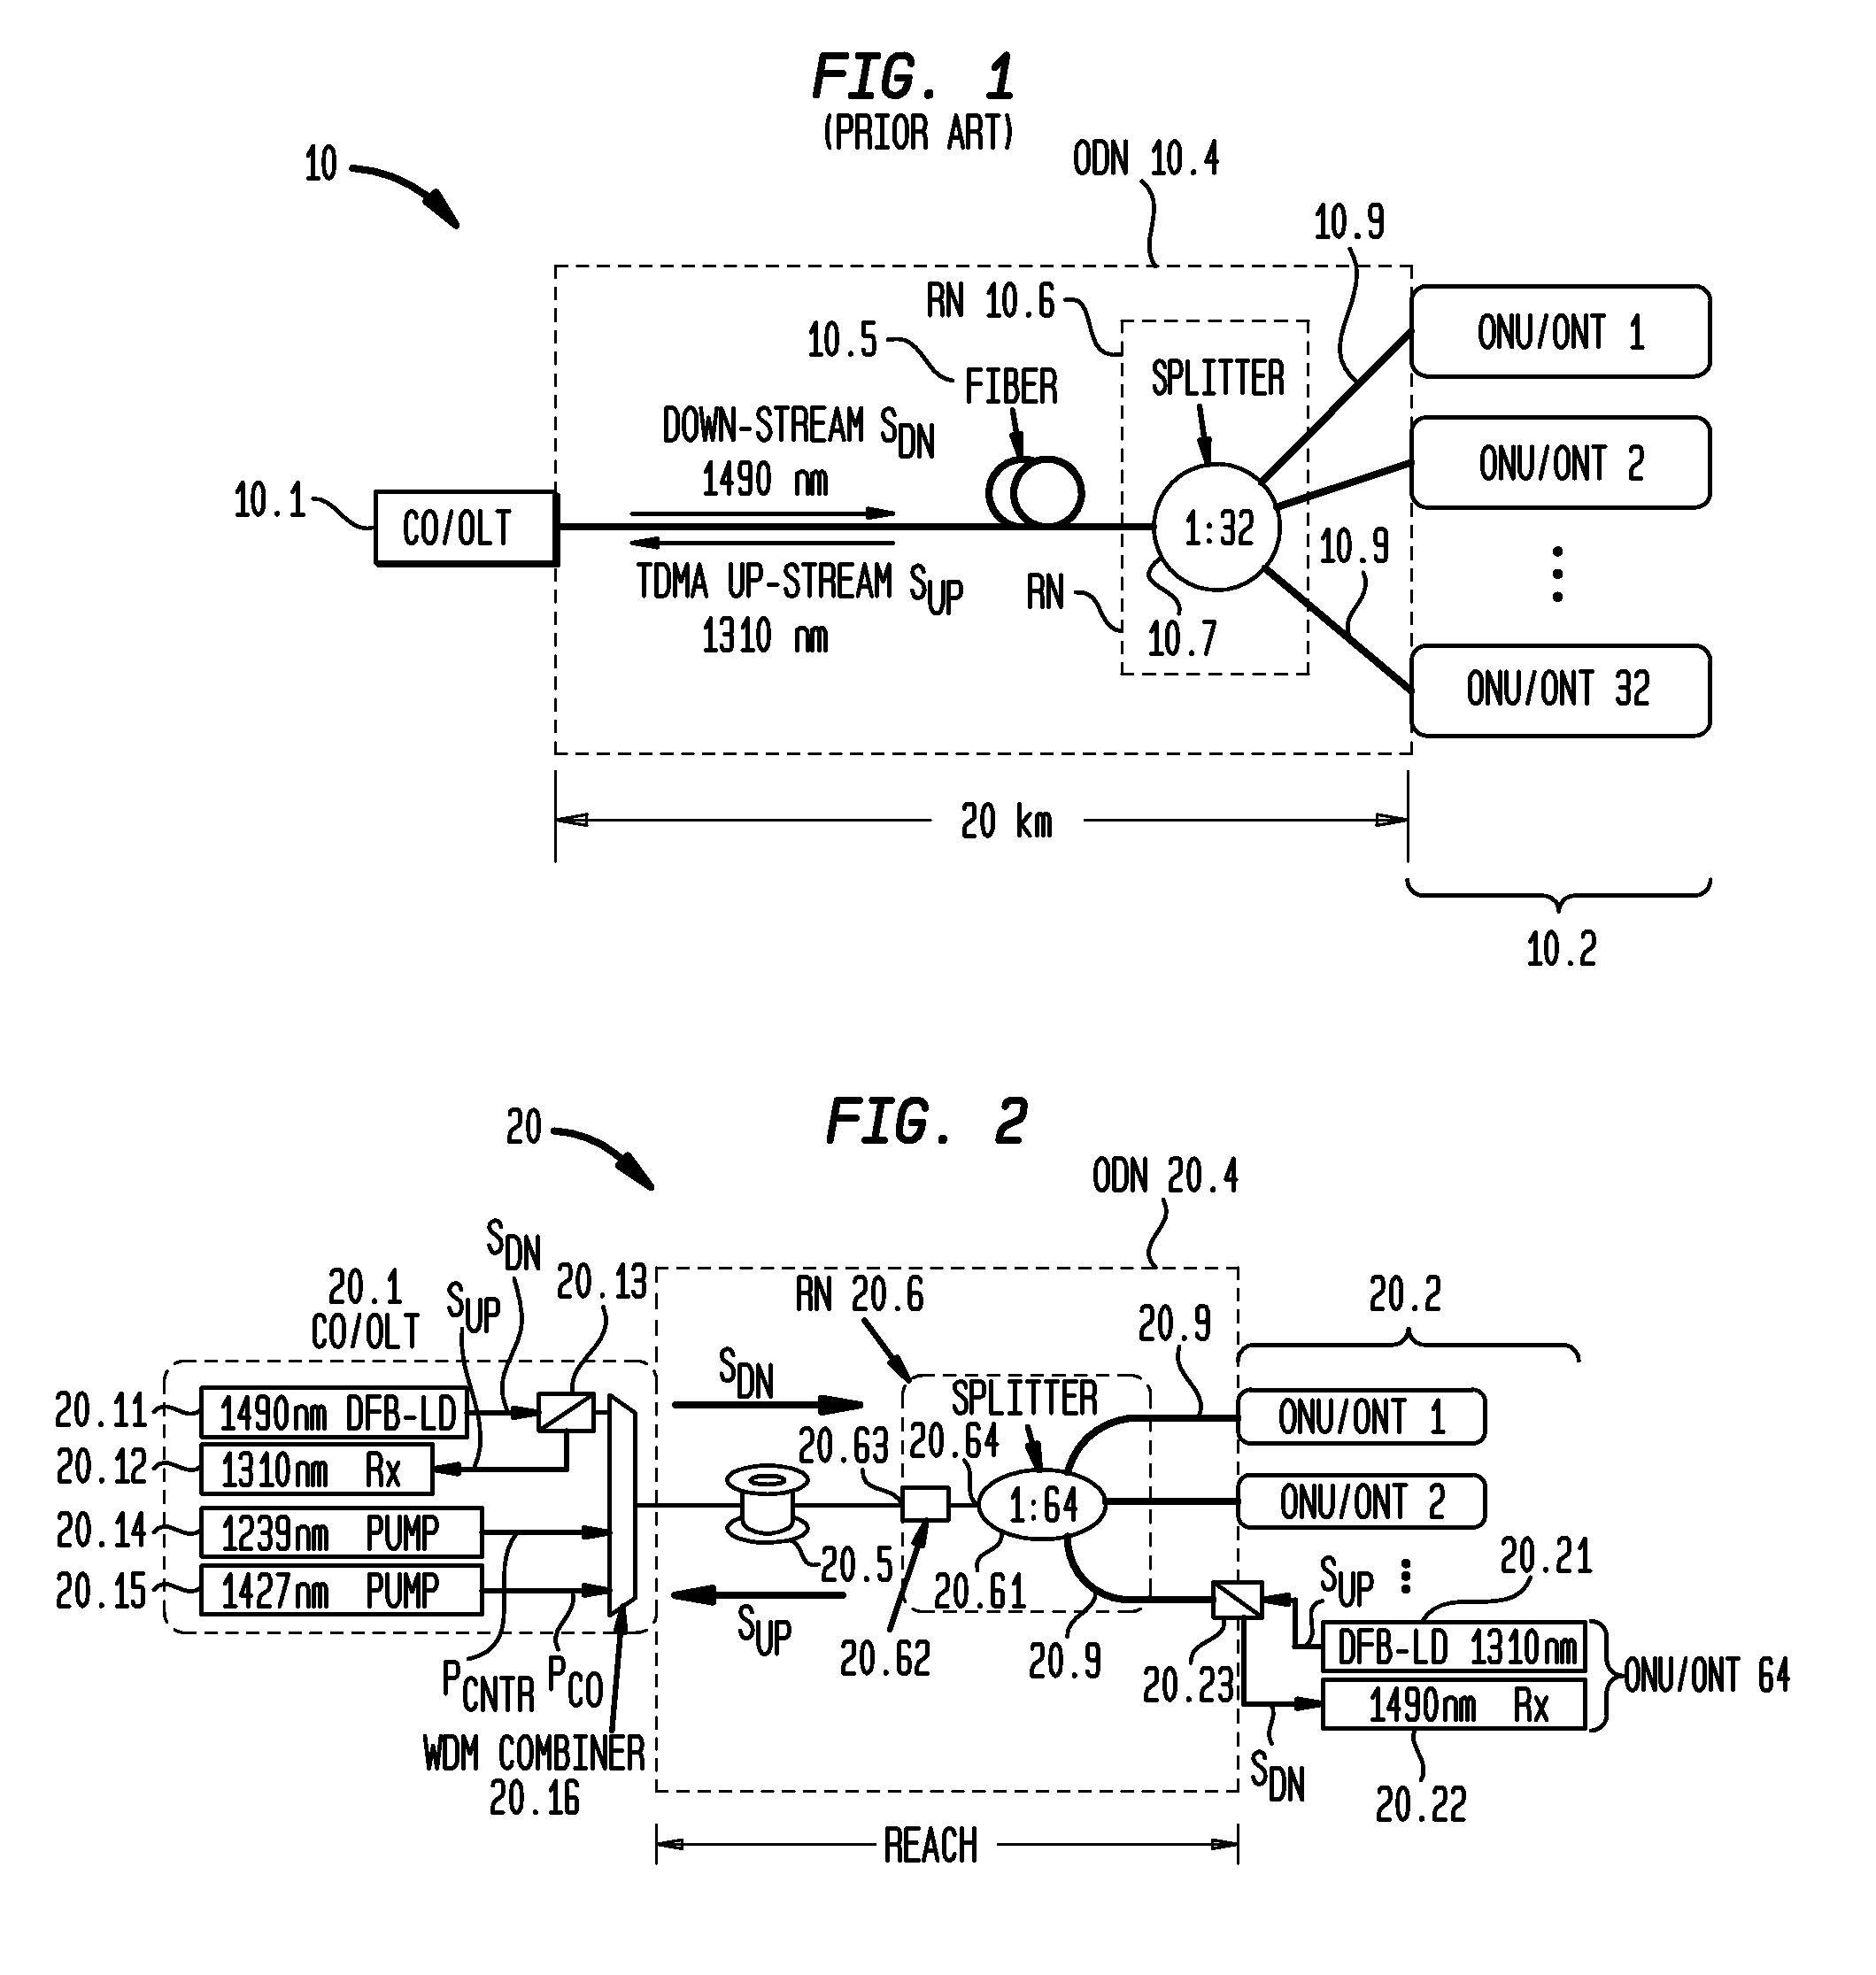 Method and apparatus using distributed raman amplification and remote pumping in bidirectional optical communication networks